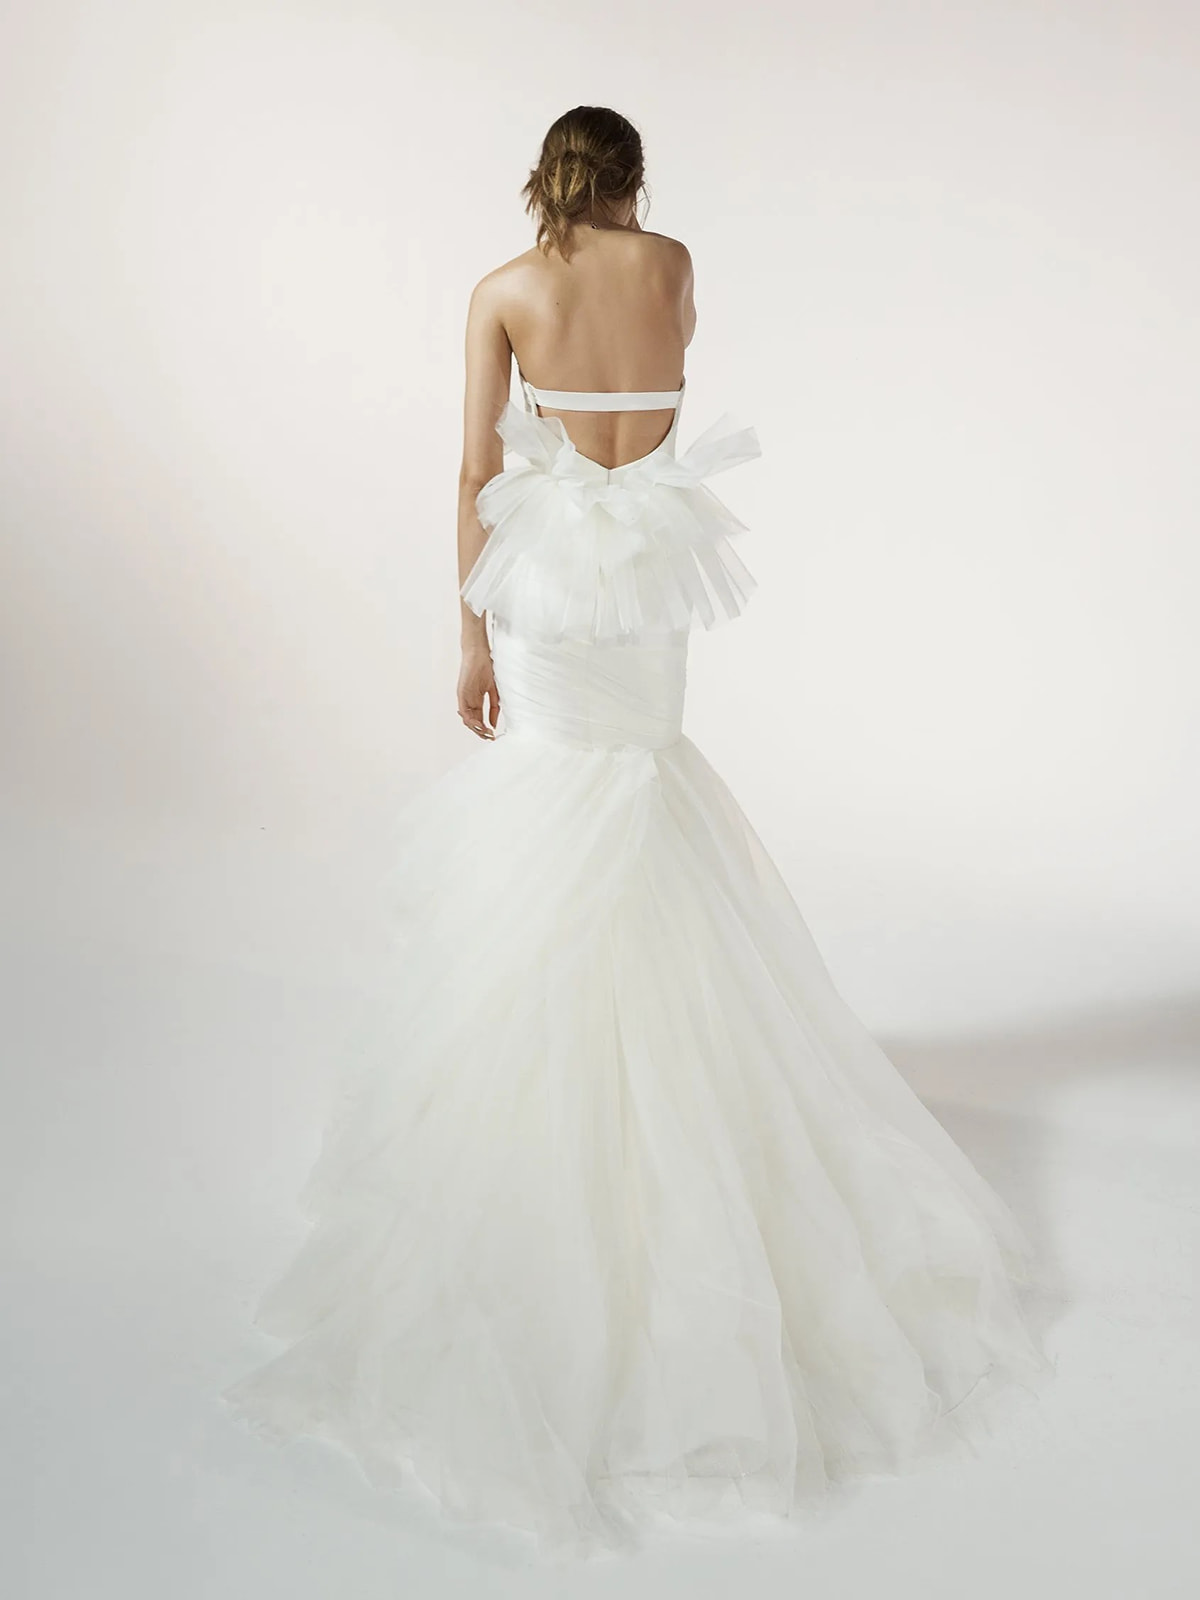 Vera Wang Bridal: With her attention to detail and impeccable tailoring.